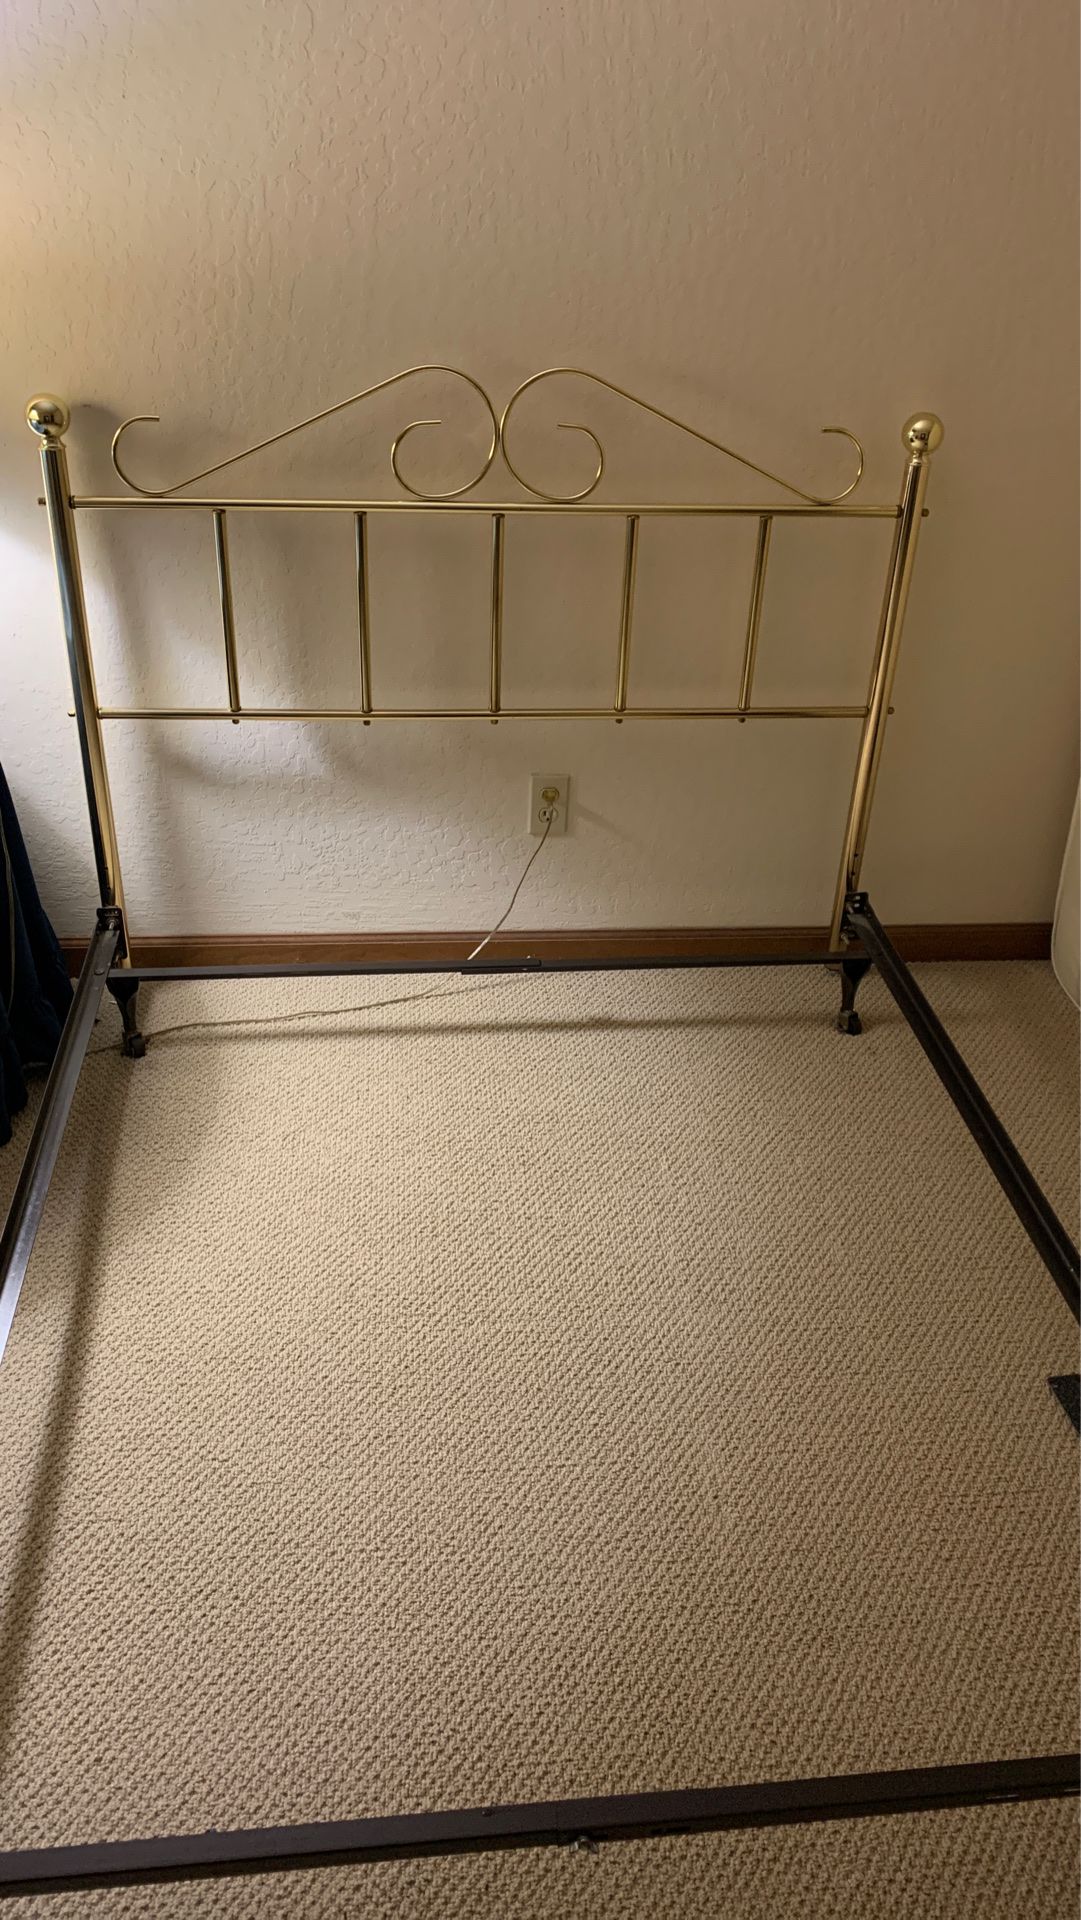 Full size bed frame-no mattresses